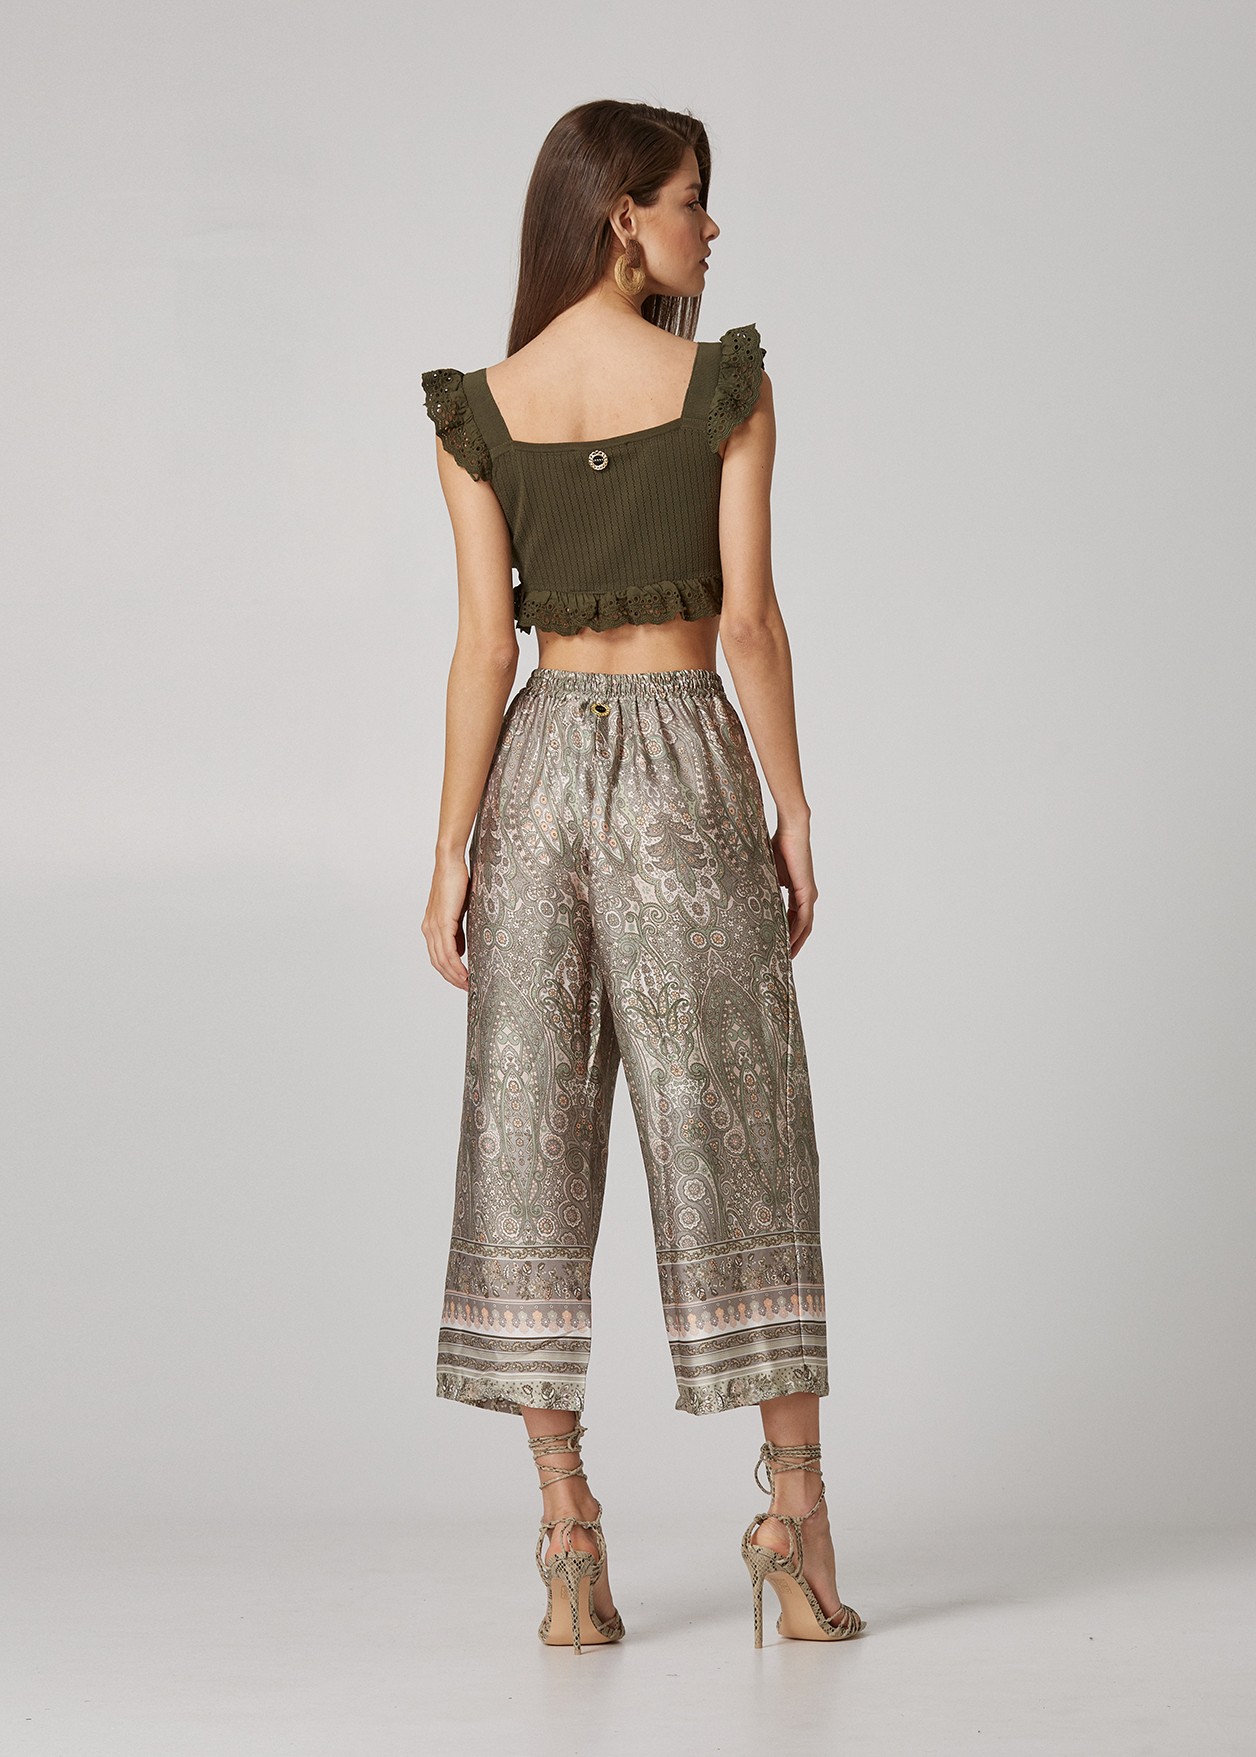 Printed trousers with satin look